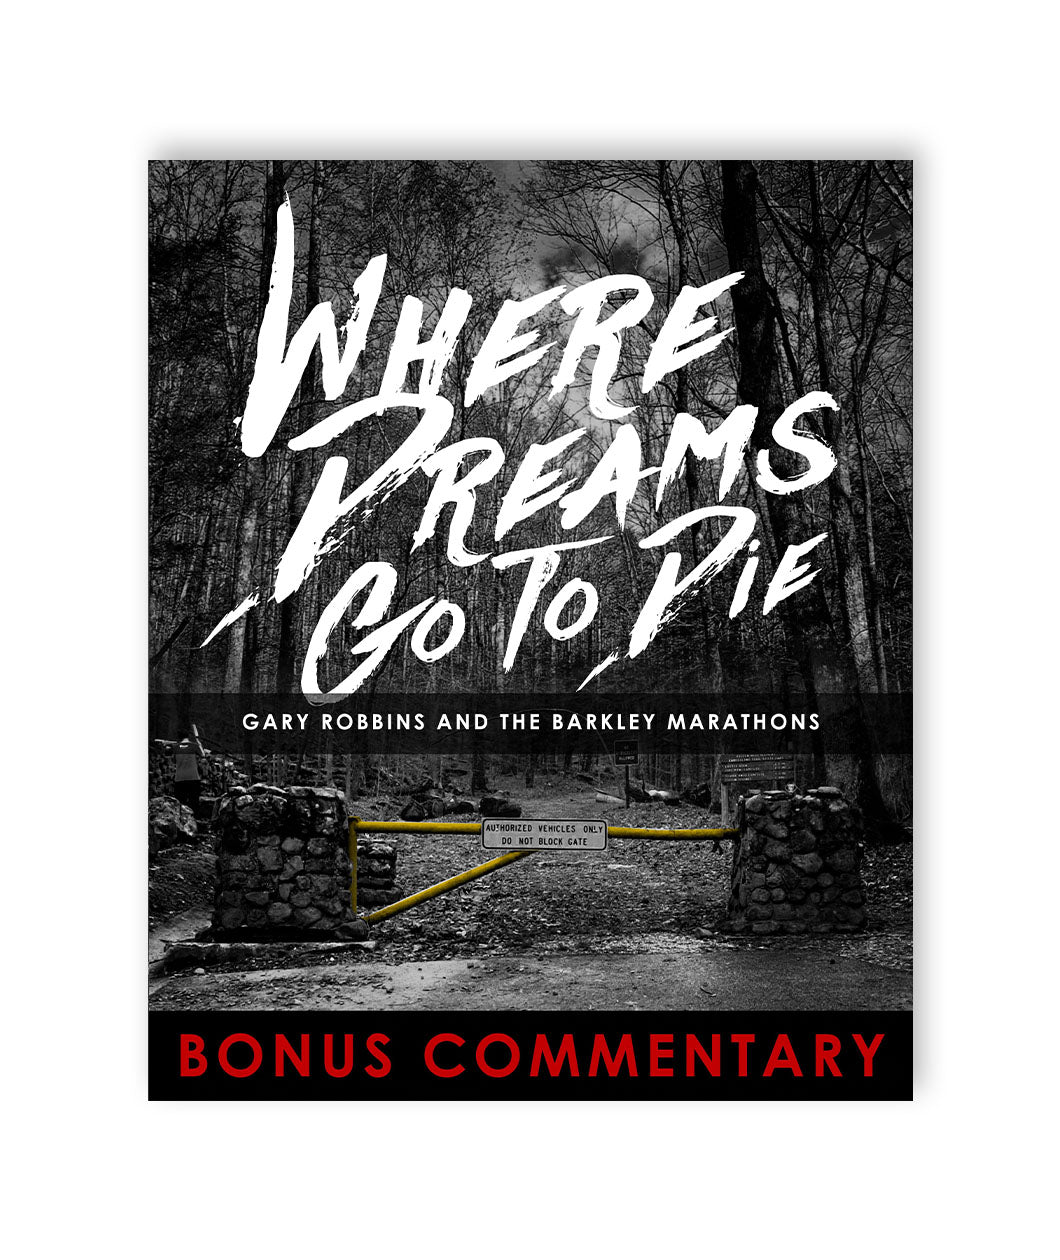 “Where Dreams Go To Die” is written in white paint font. “Gary Robbins and the Barkley Marathons” is below in white sans serif font. “Bonus Commentary” is in red sans serif font at the bottom. The background is a spooky photo of a forest with a closed yellow gate - from The Ginger Runner